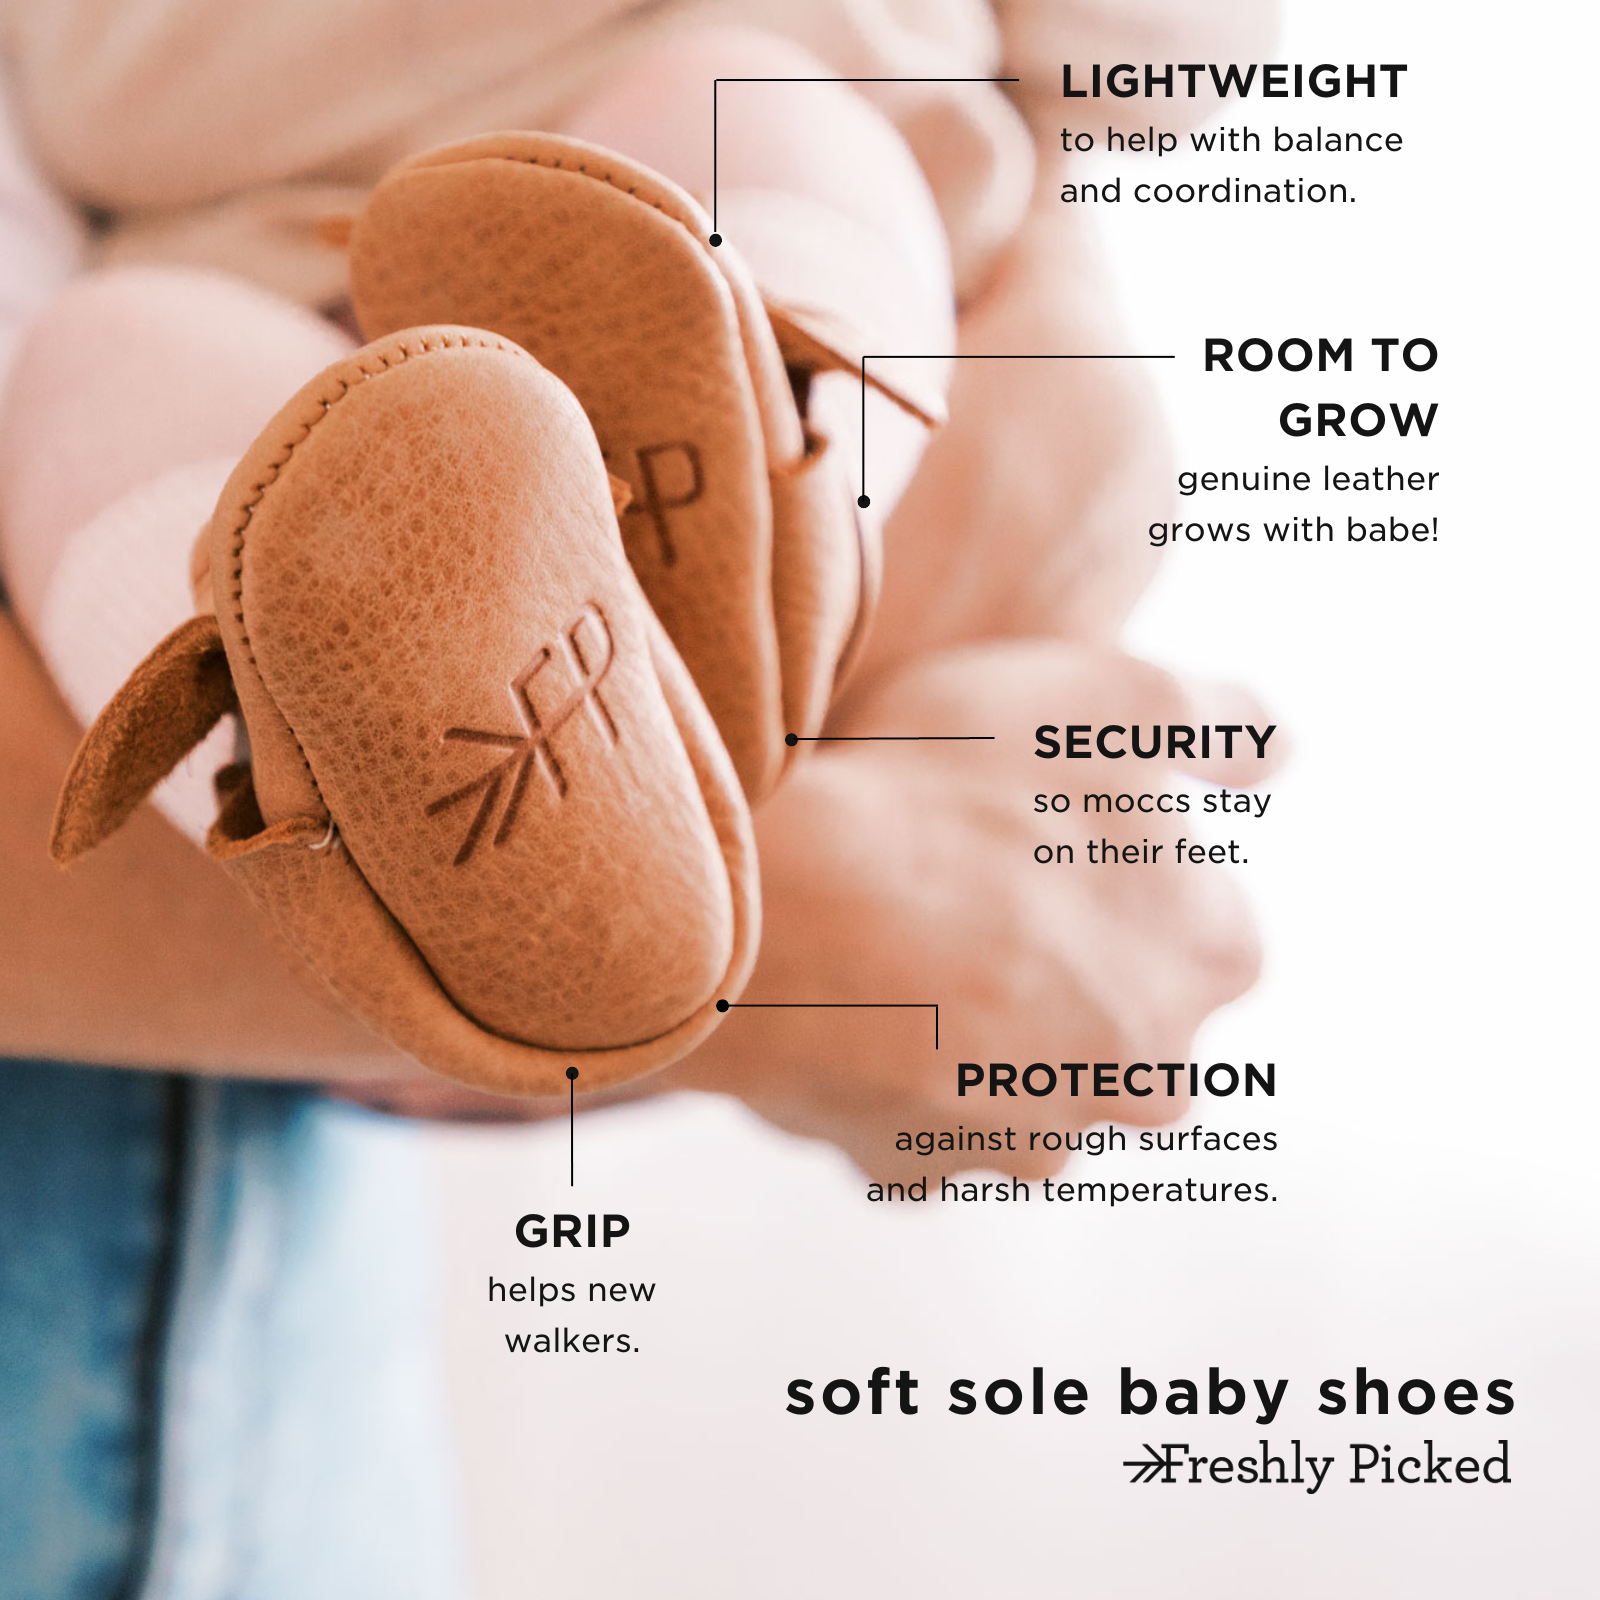 Soft Sole Shoes: Are They Good For Your Baby?